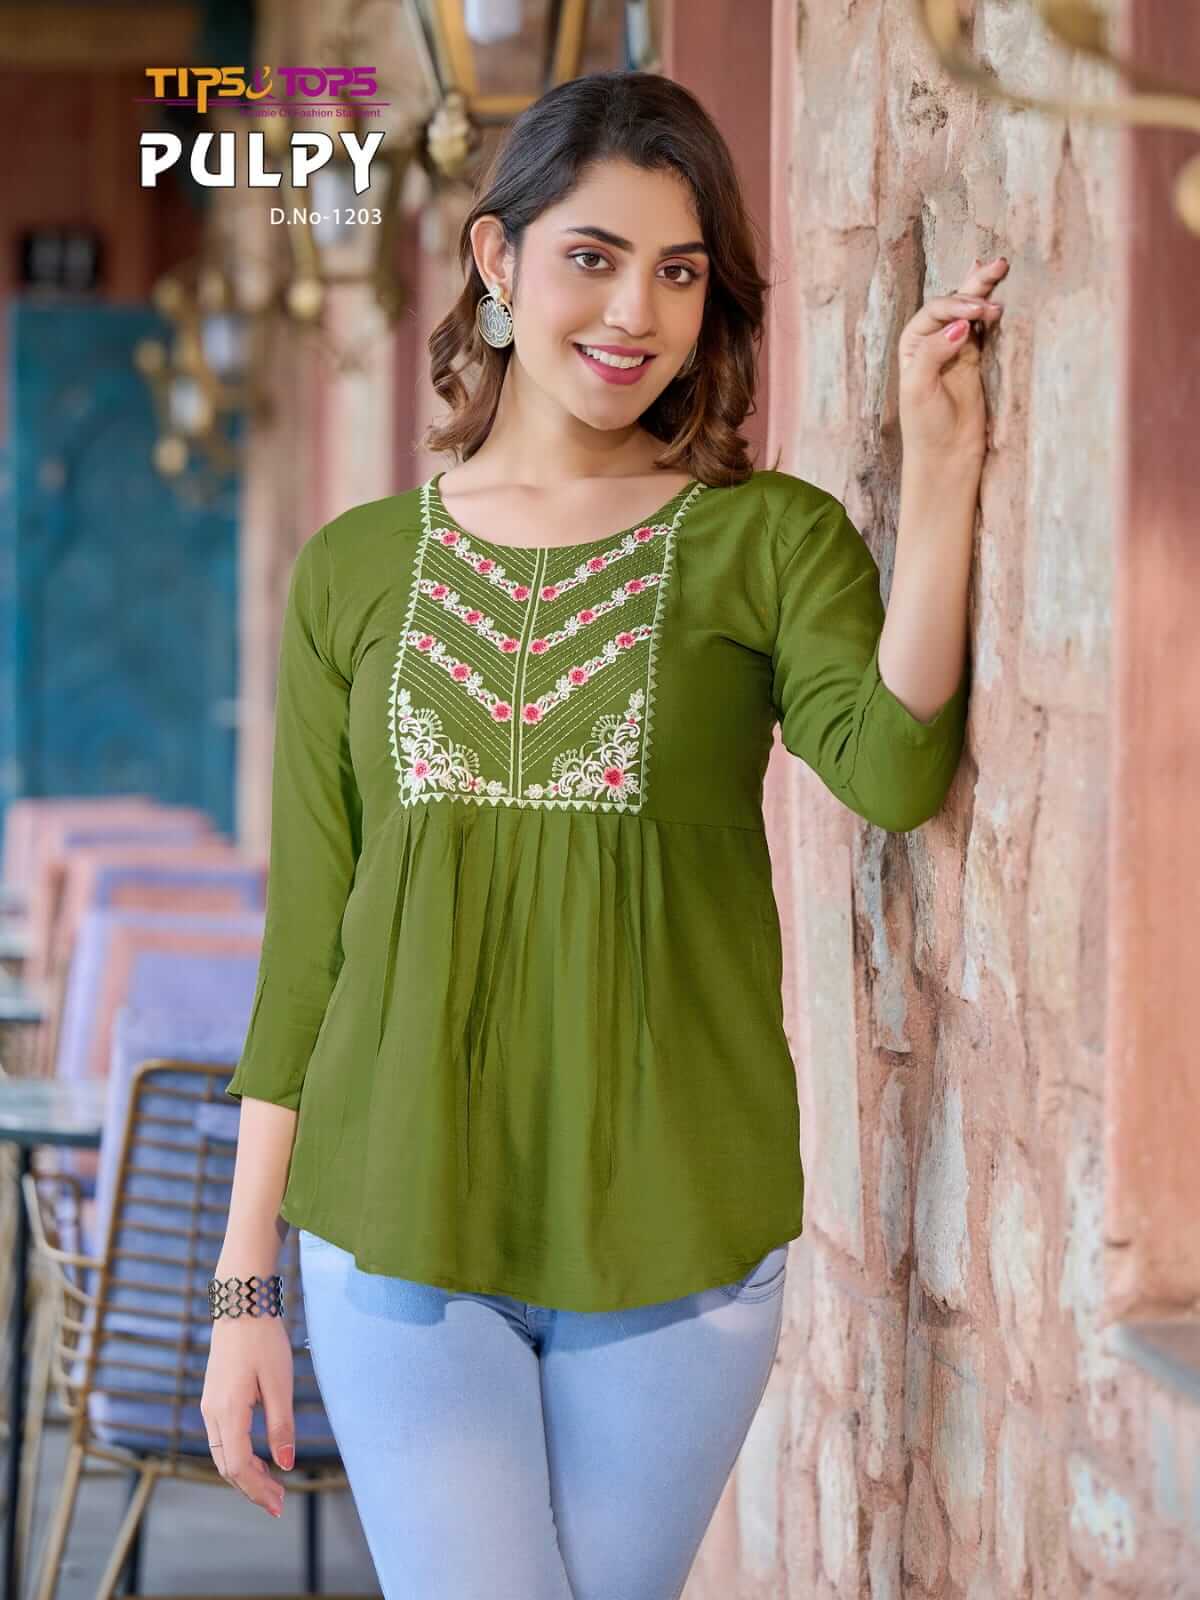 Tips Tops Pulpy vol 12 Ladies Tops collection 9